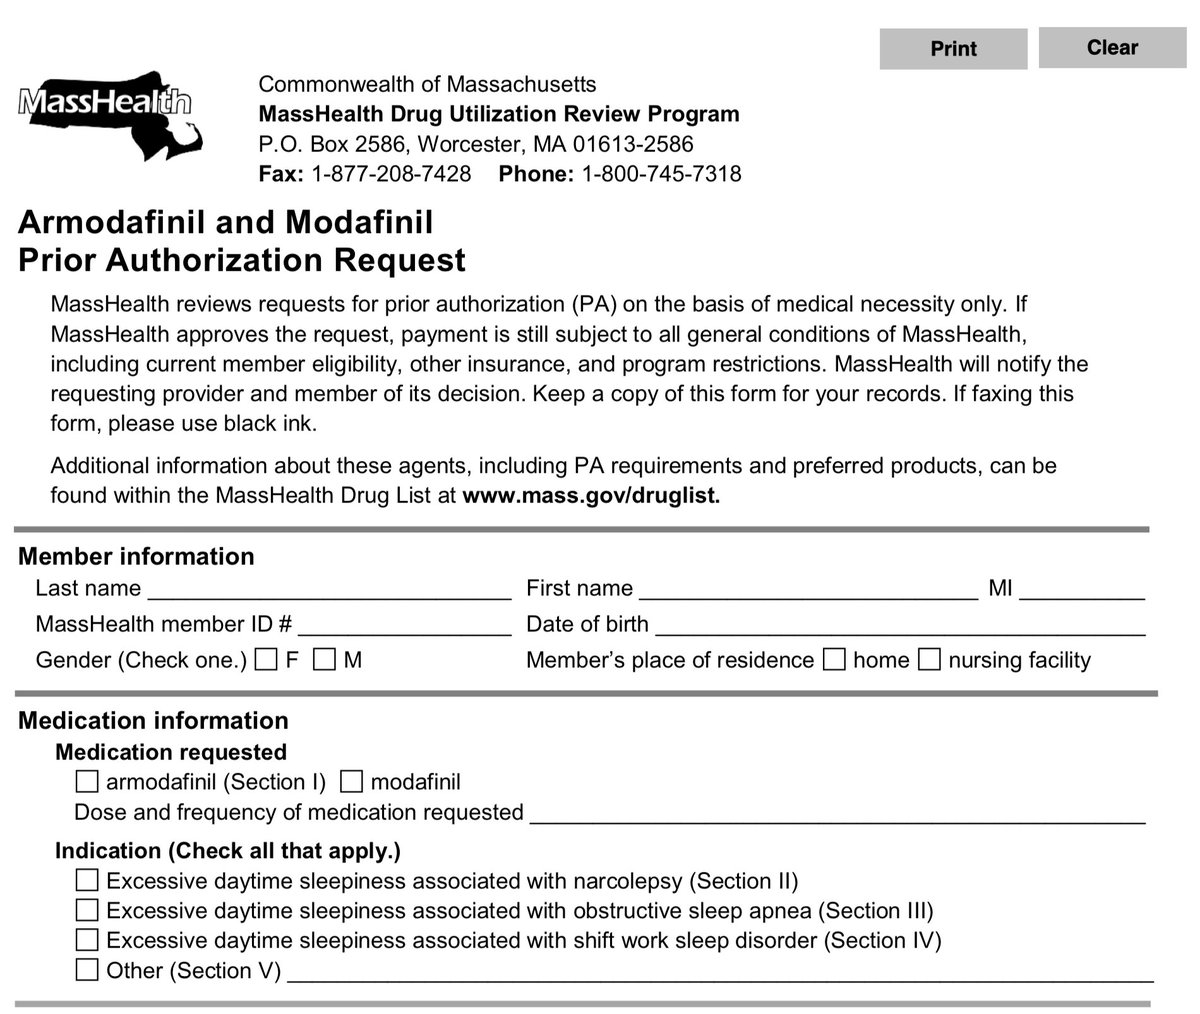 Matthew Cortland Esq On Twitter This Is Masshealth S Medicaid In Ma Prior Authorization Form For A Medication That Costs Somewhere Between 1 000 1 800 Per Month Https T Co Anp9kmnpxq